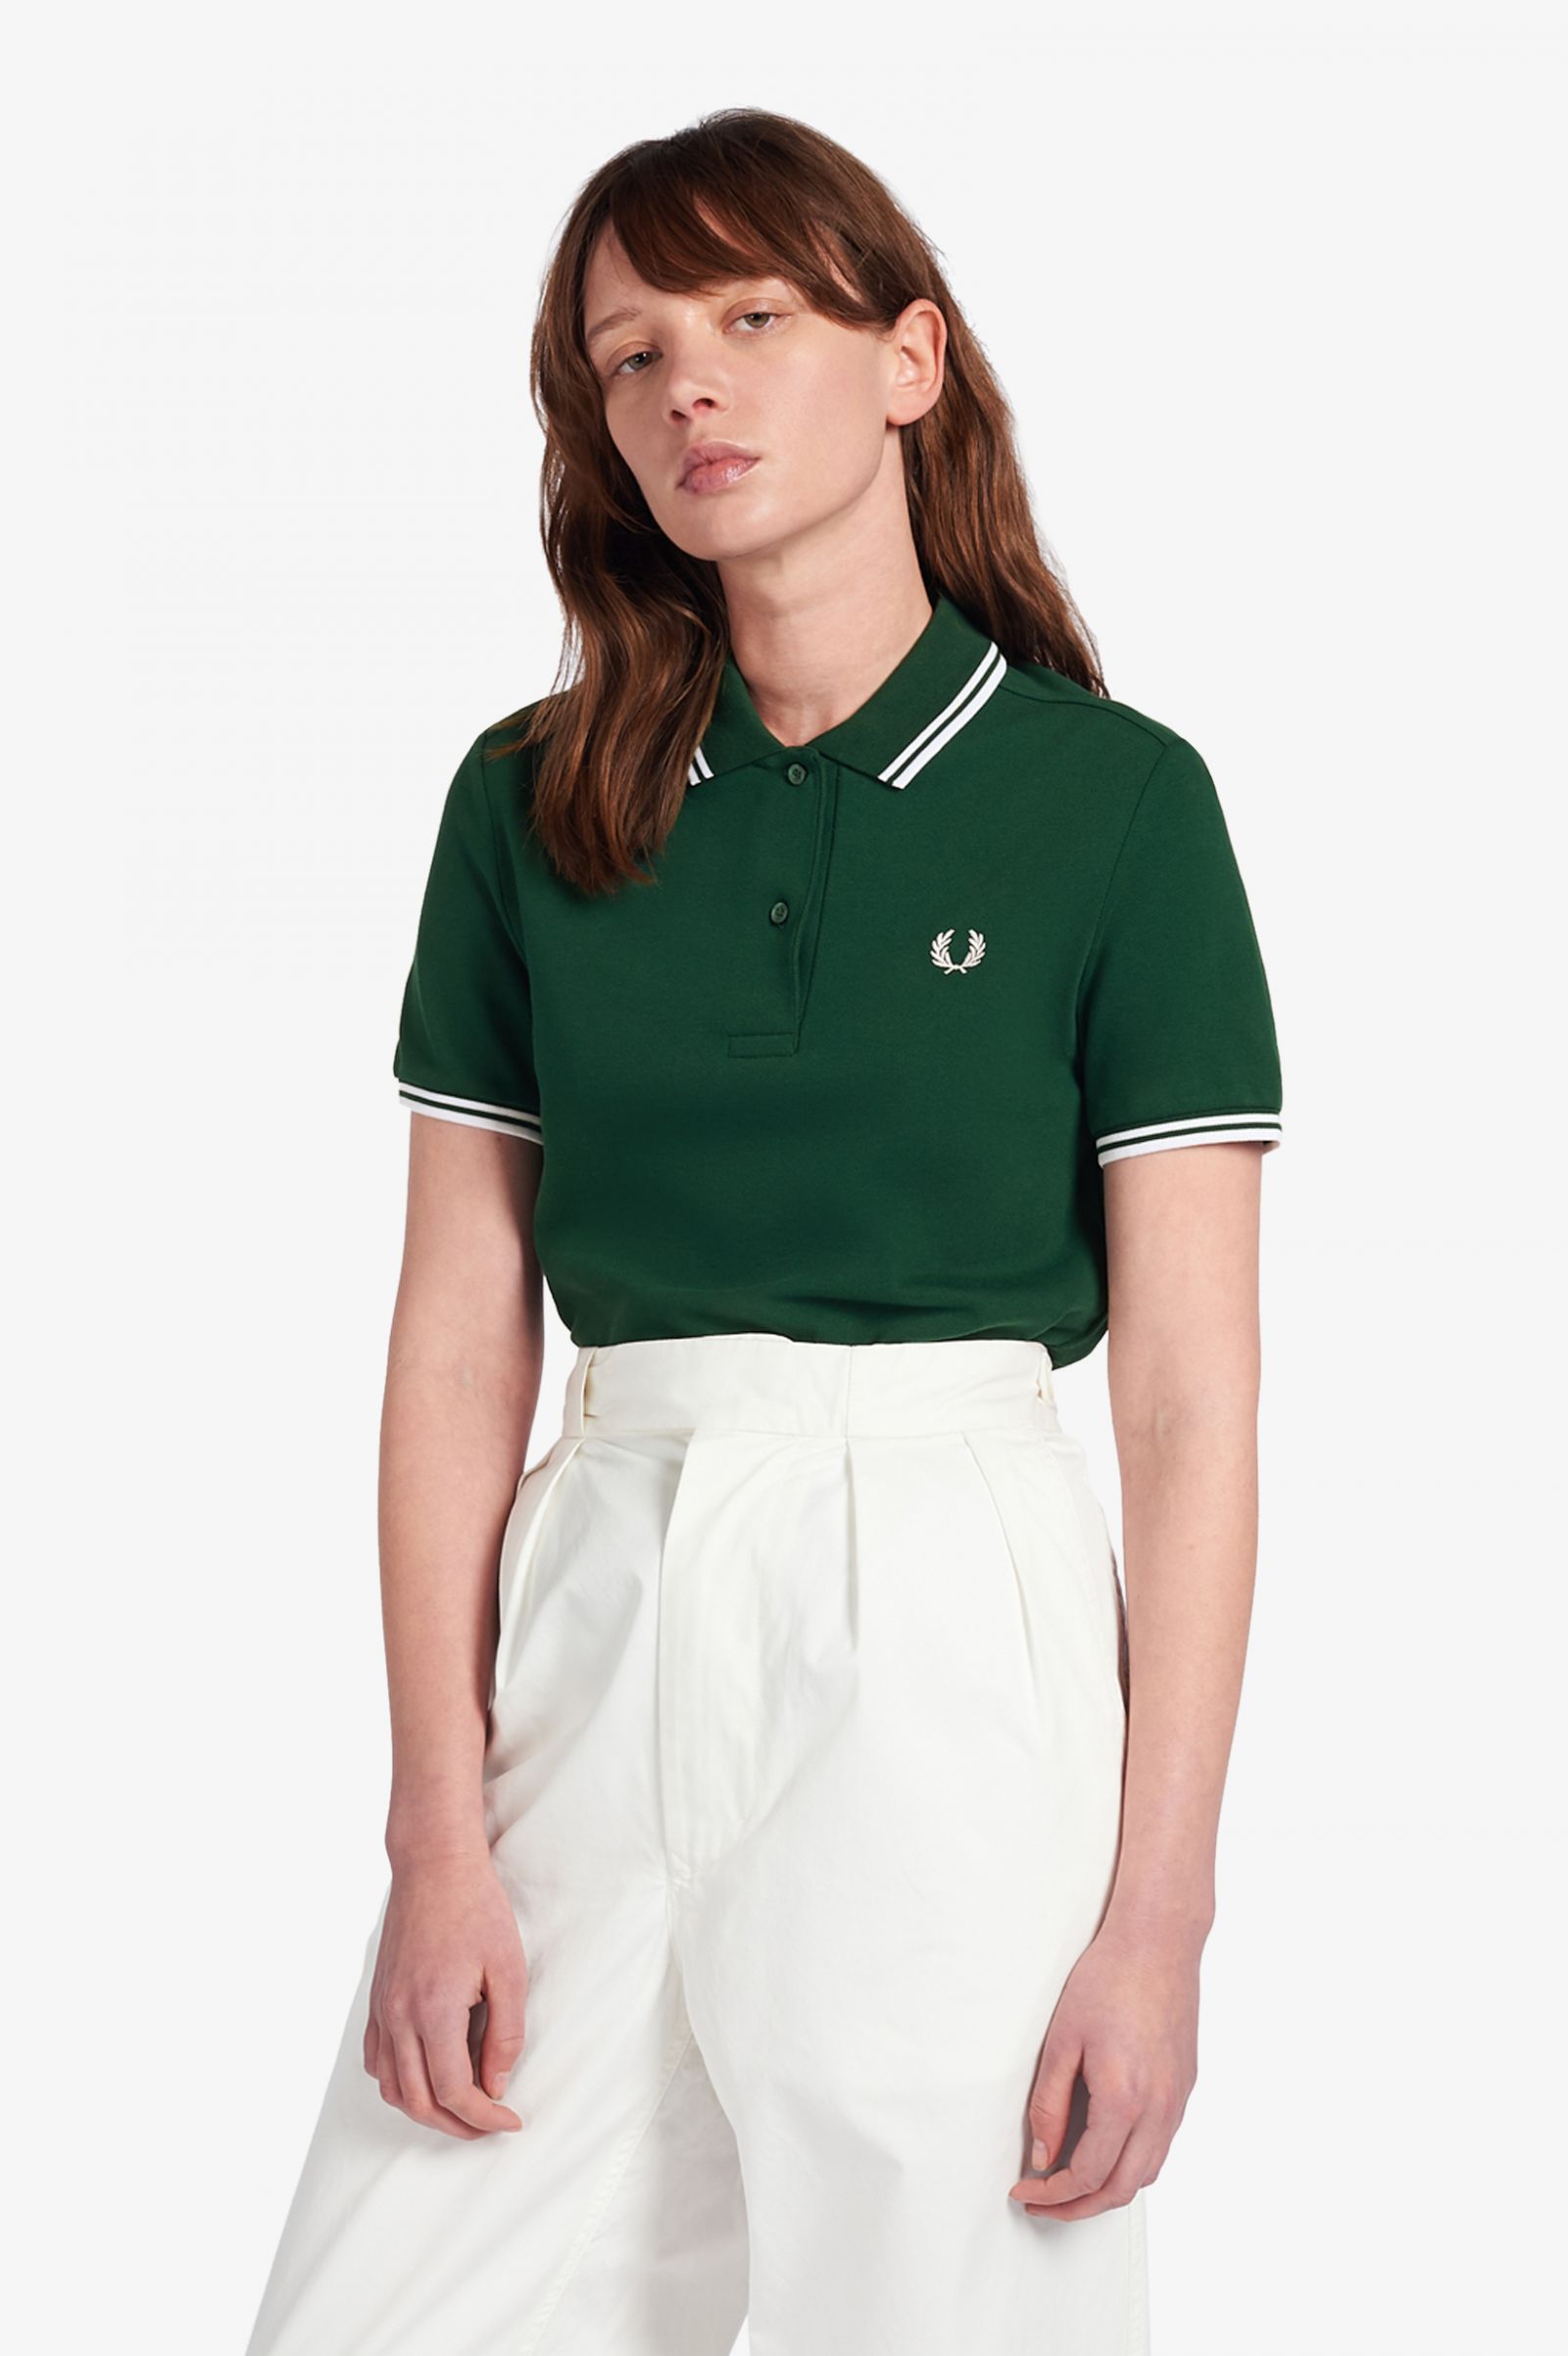 G3600 - Ivy / White / White | The Fred Perry Shirt | Women's Short ...